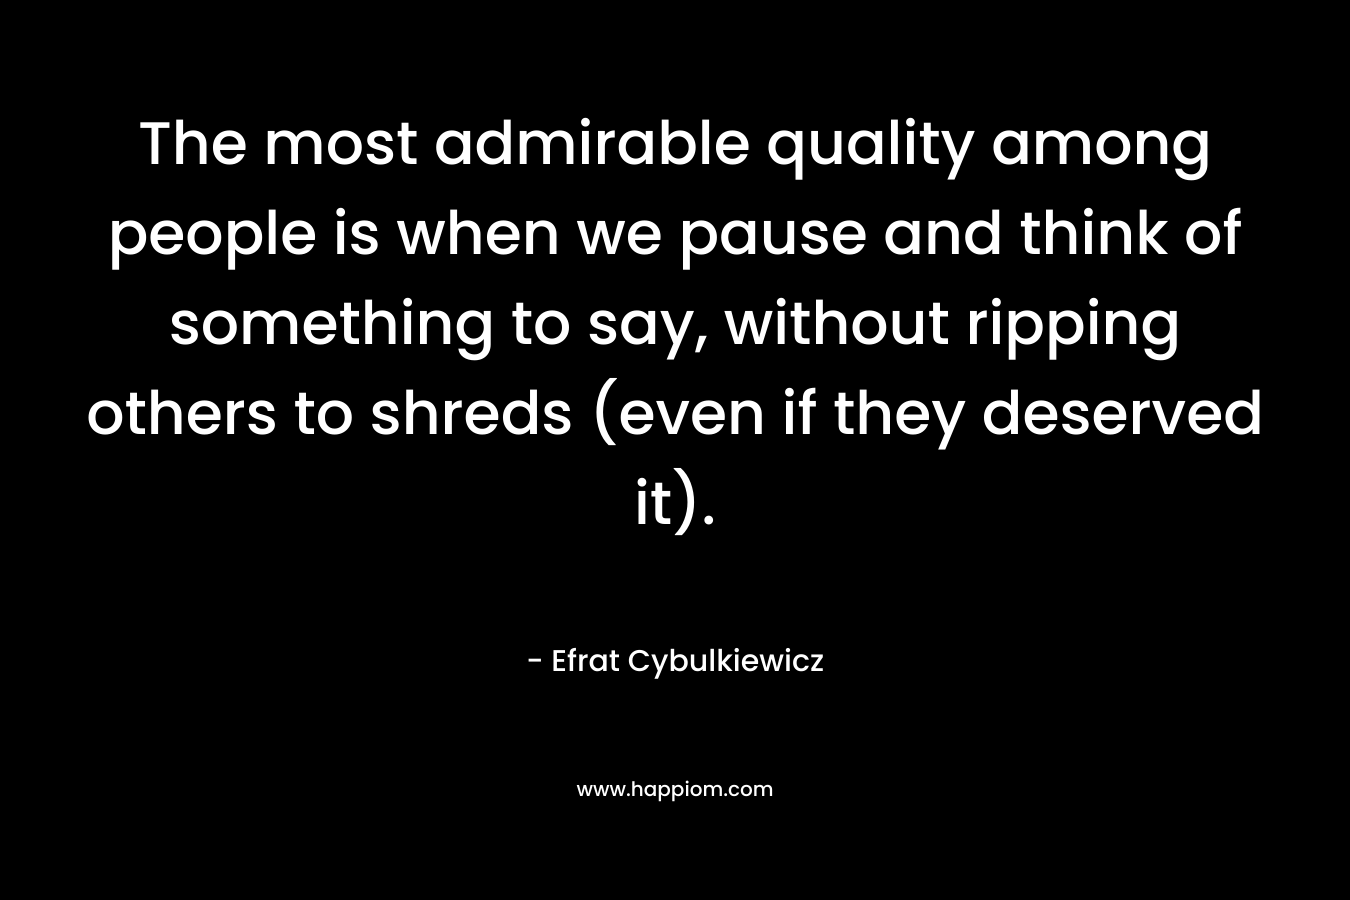 The most admirable quality among people is when we pause and think of something to say, without ripping others to shreds (even if they deserved it). – Efrat Cybulkiewicz